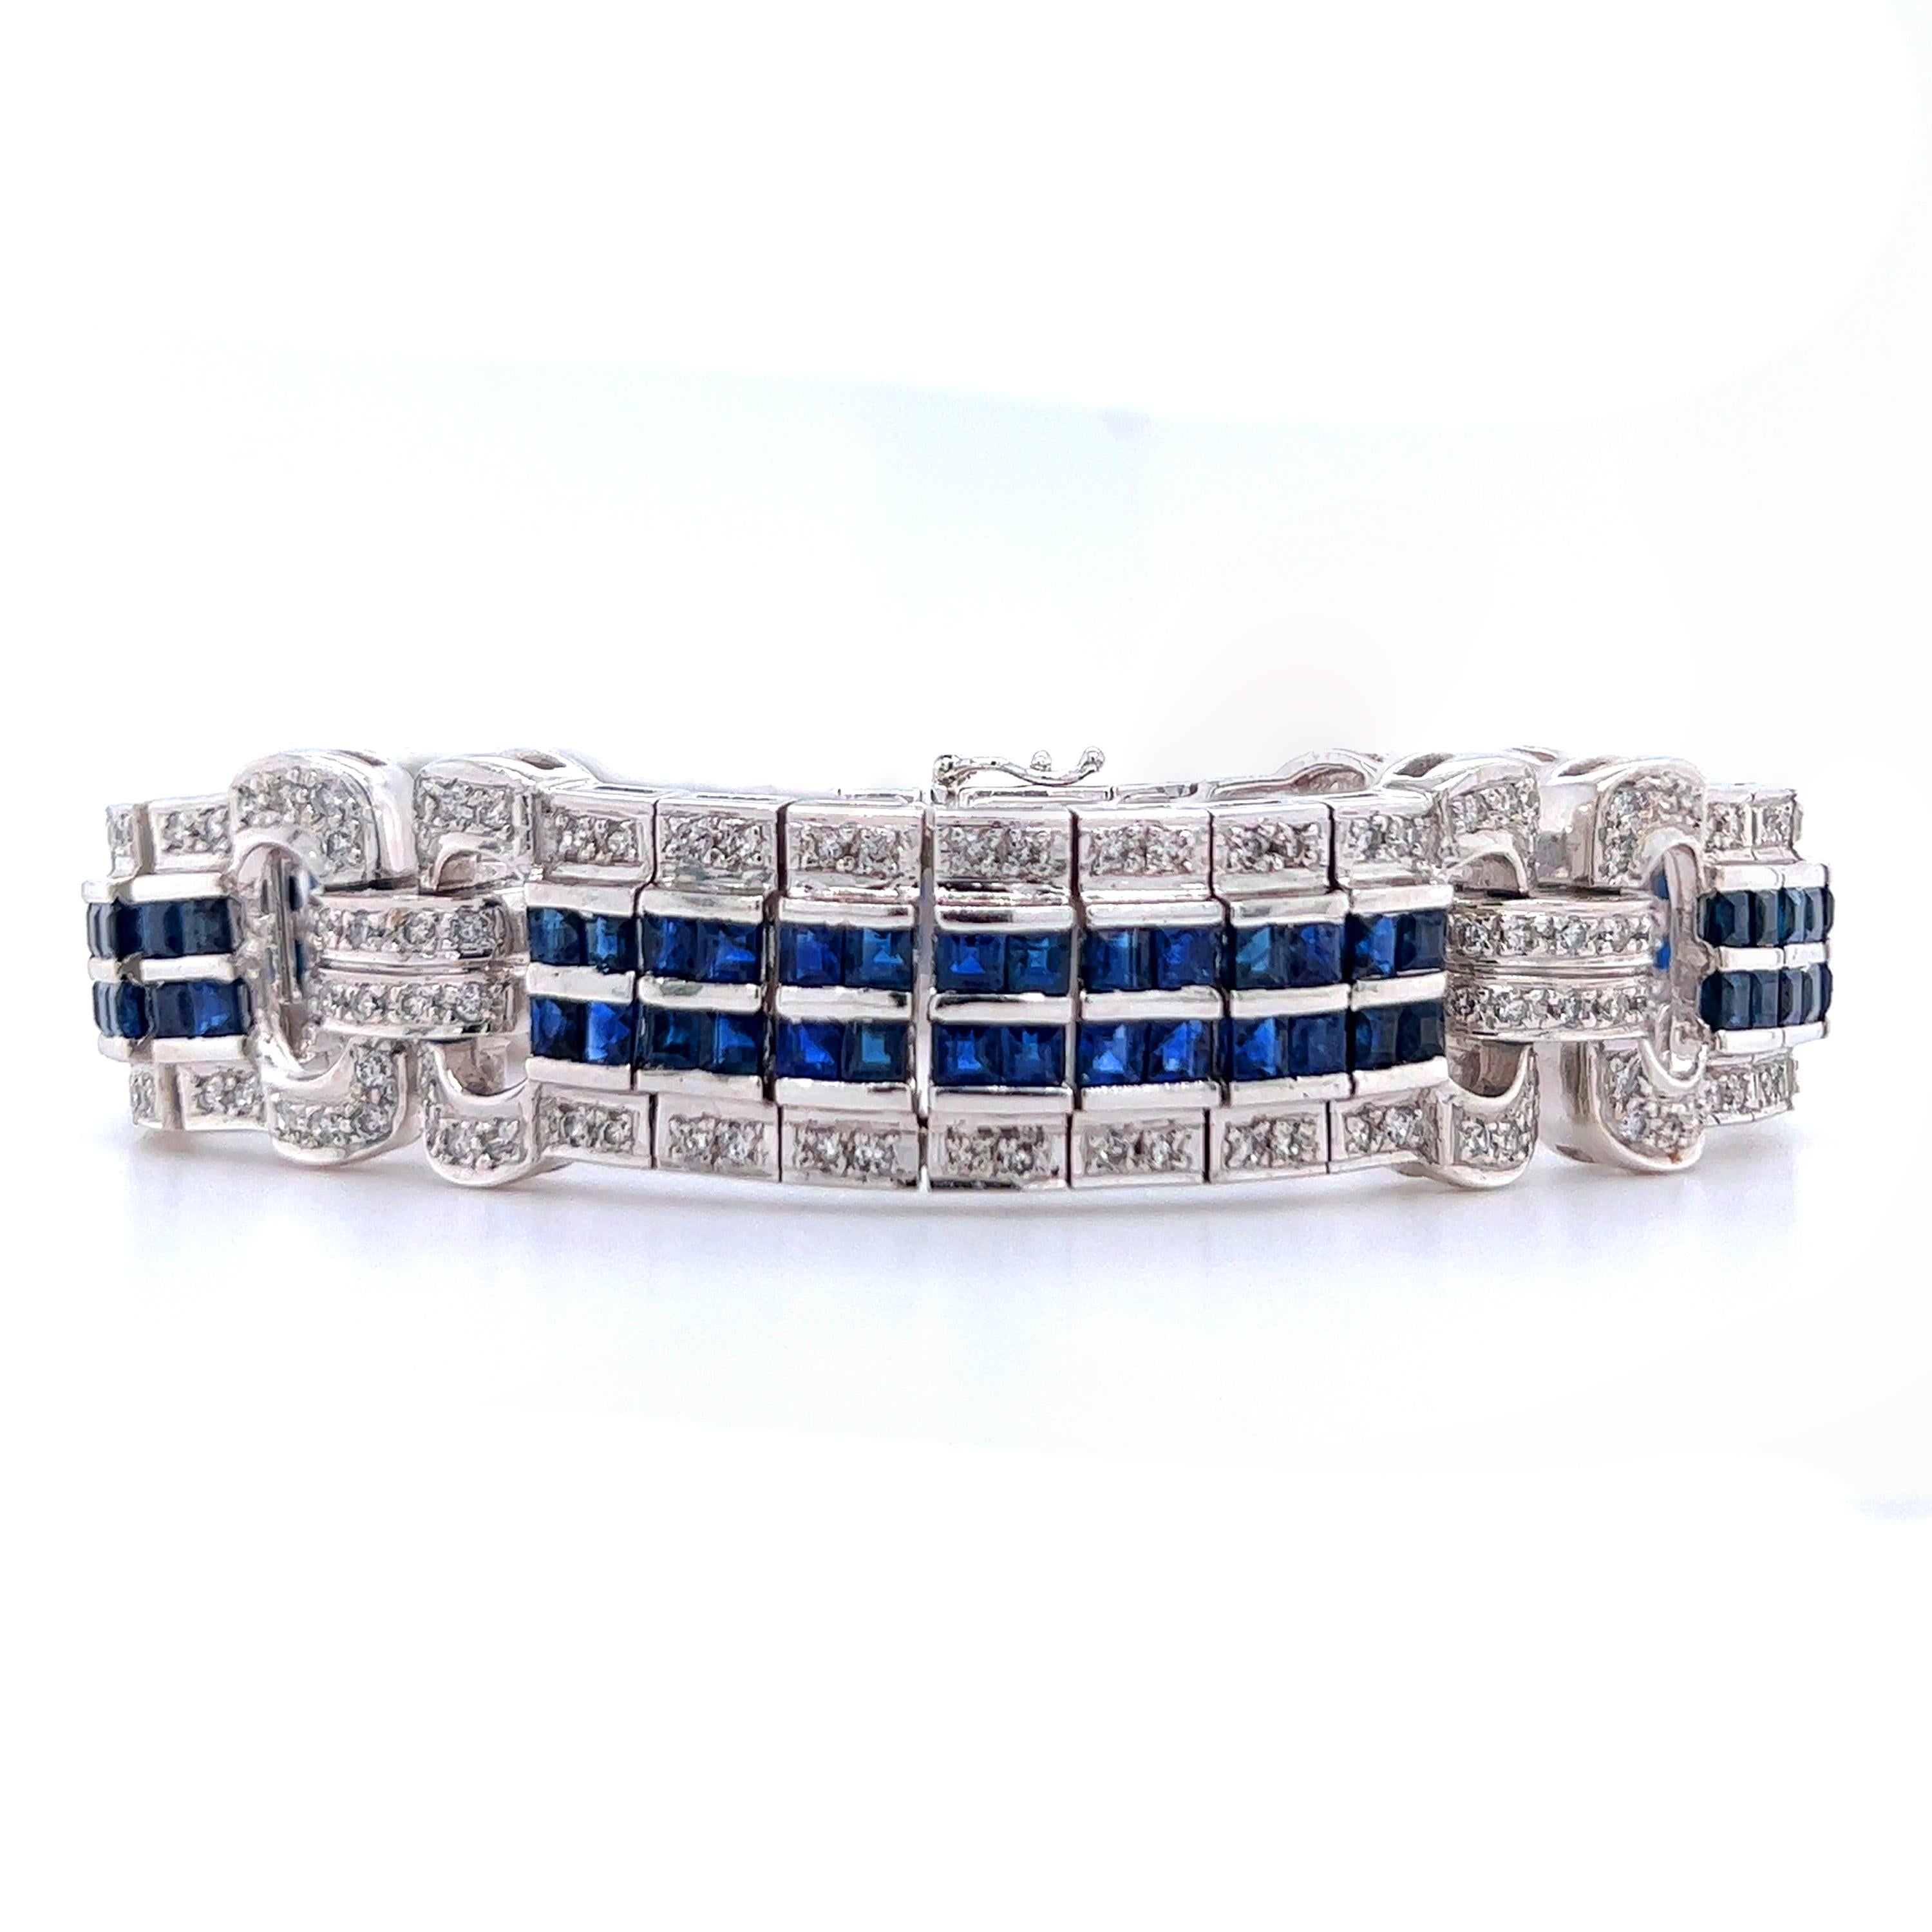 18K White Gold Princess Cut Blue Sapphire Diamond Bracelet

Apprx. 2.40ct. G-H color, SI clarity diamonds total weight
Apprx. 5.80ct. Princess cut Blue Sapphires

7 inches in length. 14mm width.